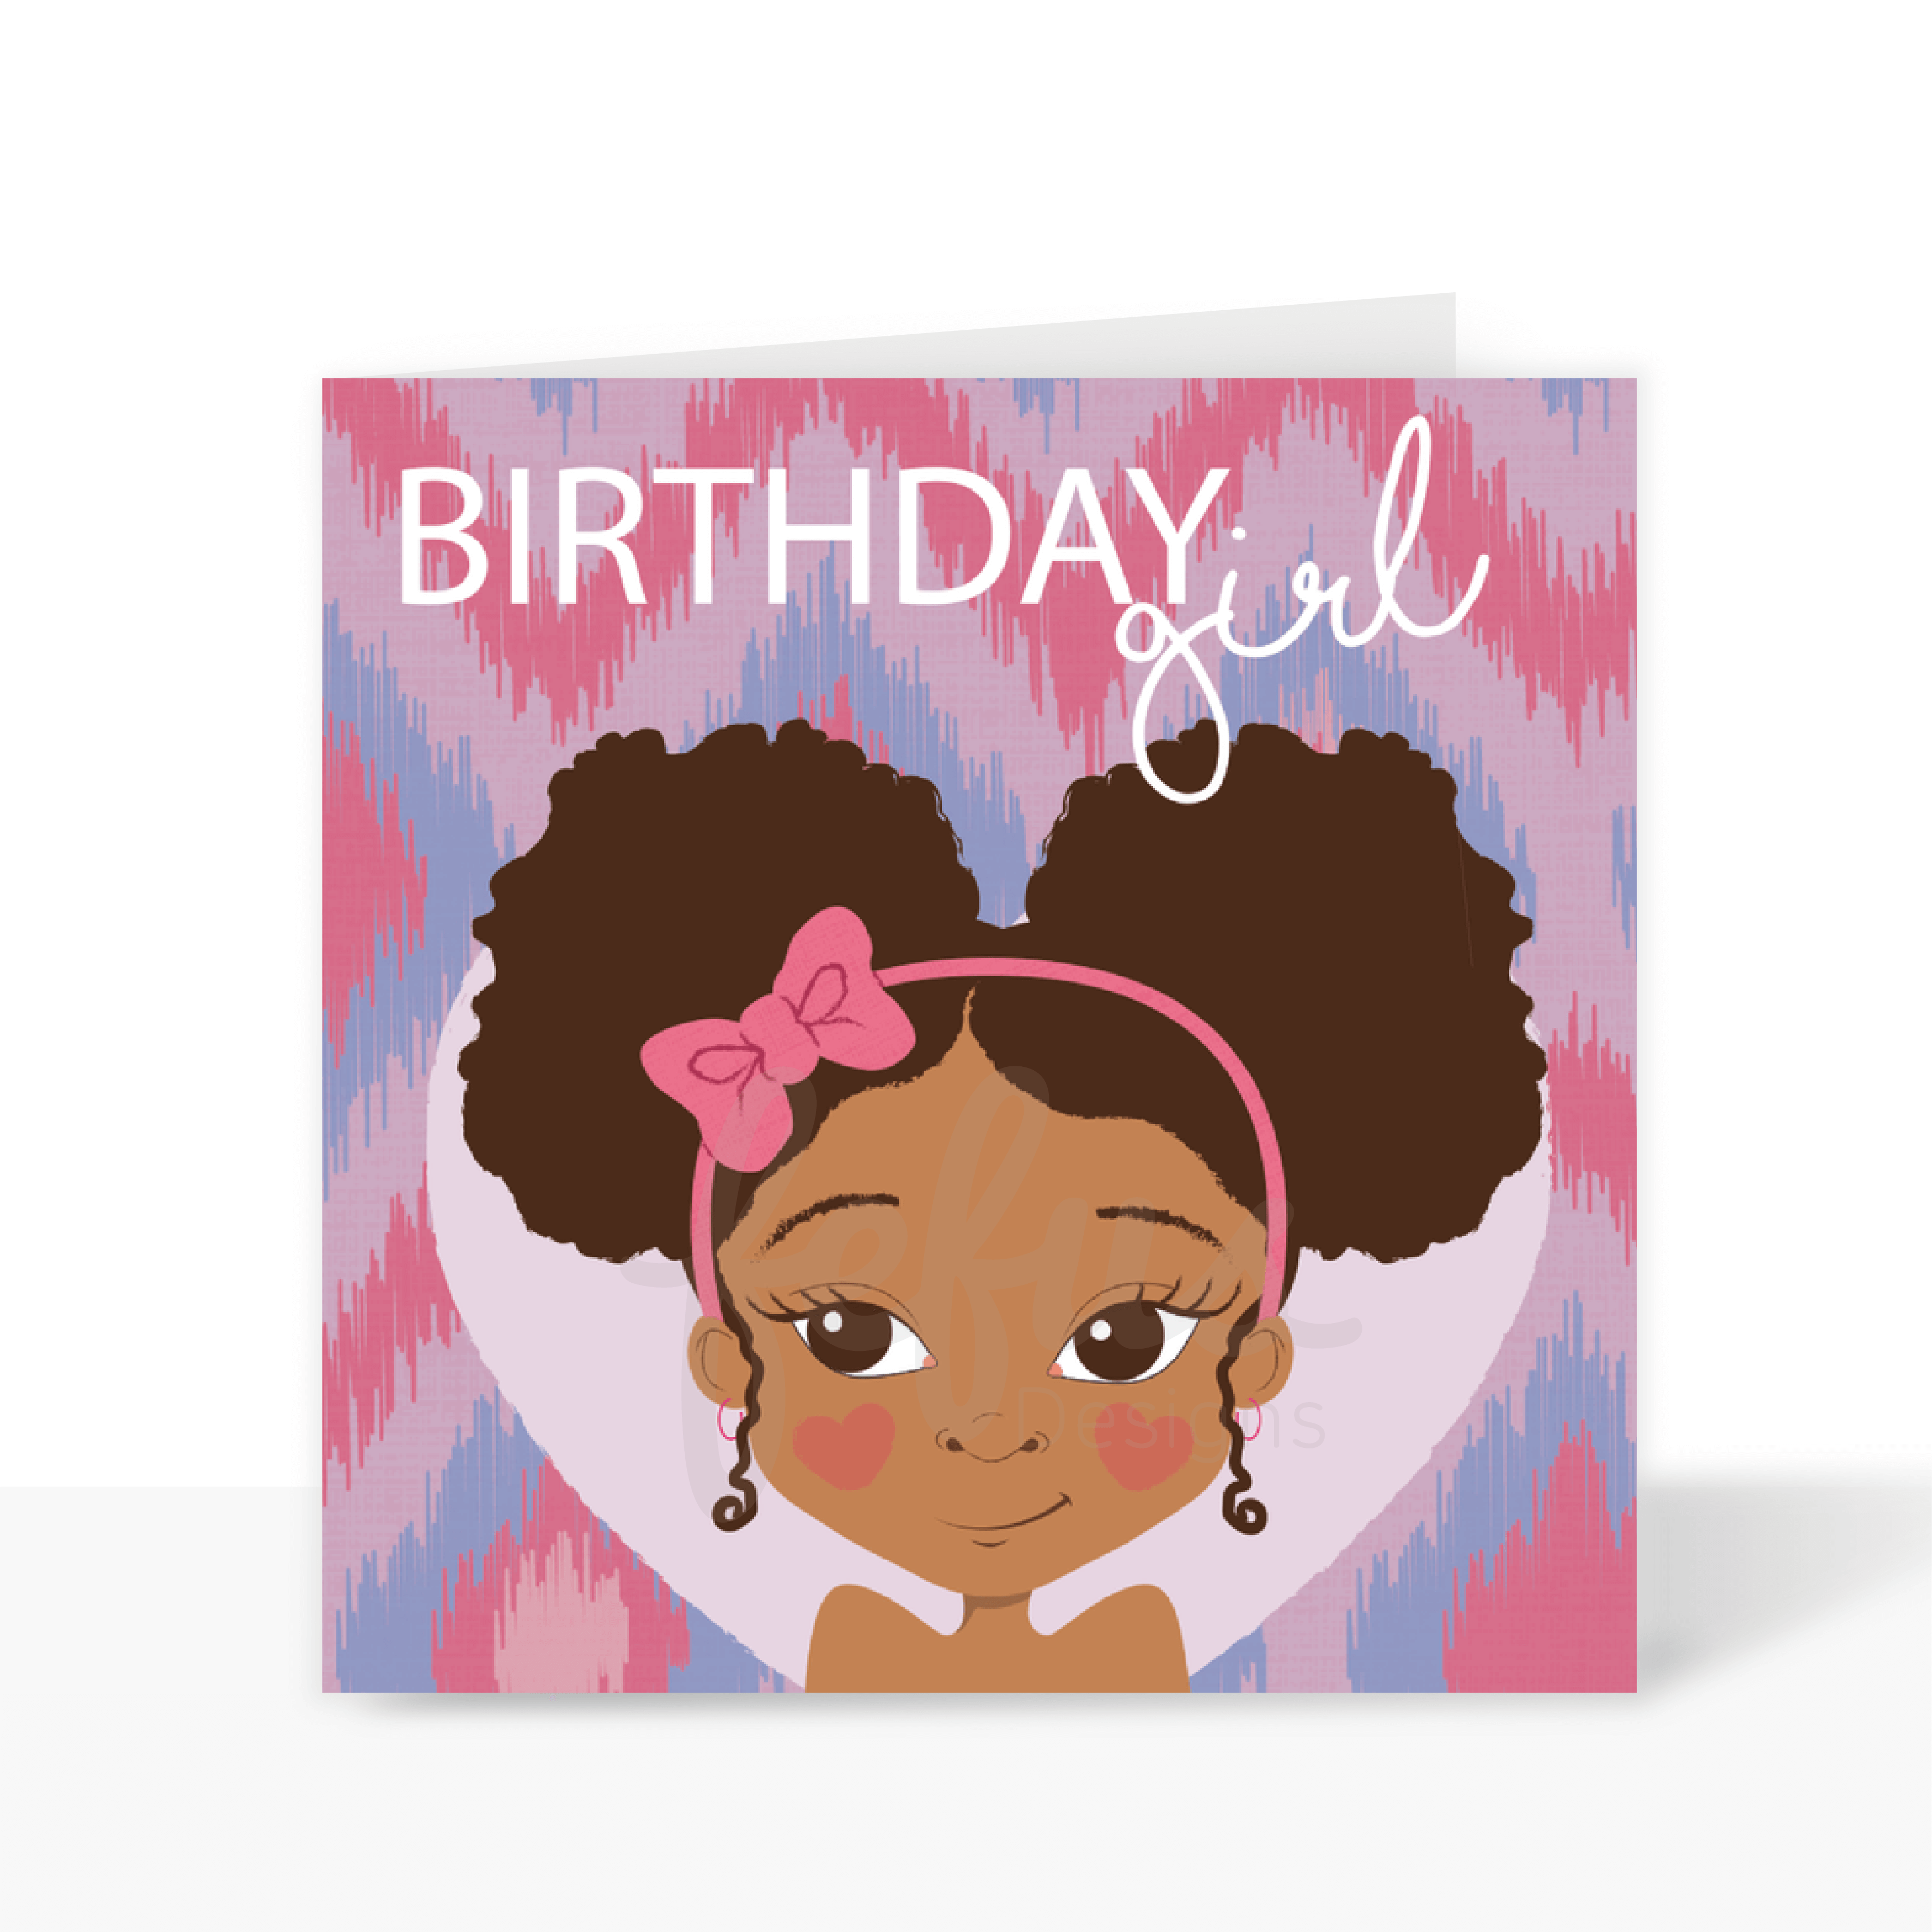  A colorful birthday card with an illustration of a mixed-race girl named Ayana. She has dark curly hair styled in afro puffs and a joyful expression.